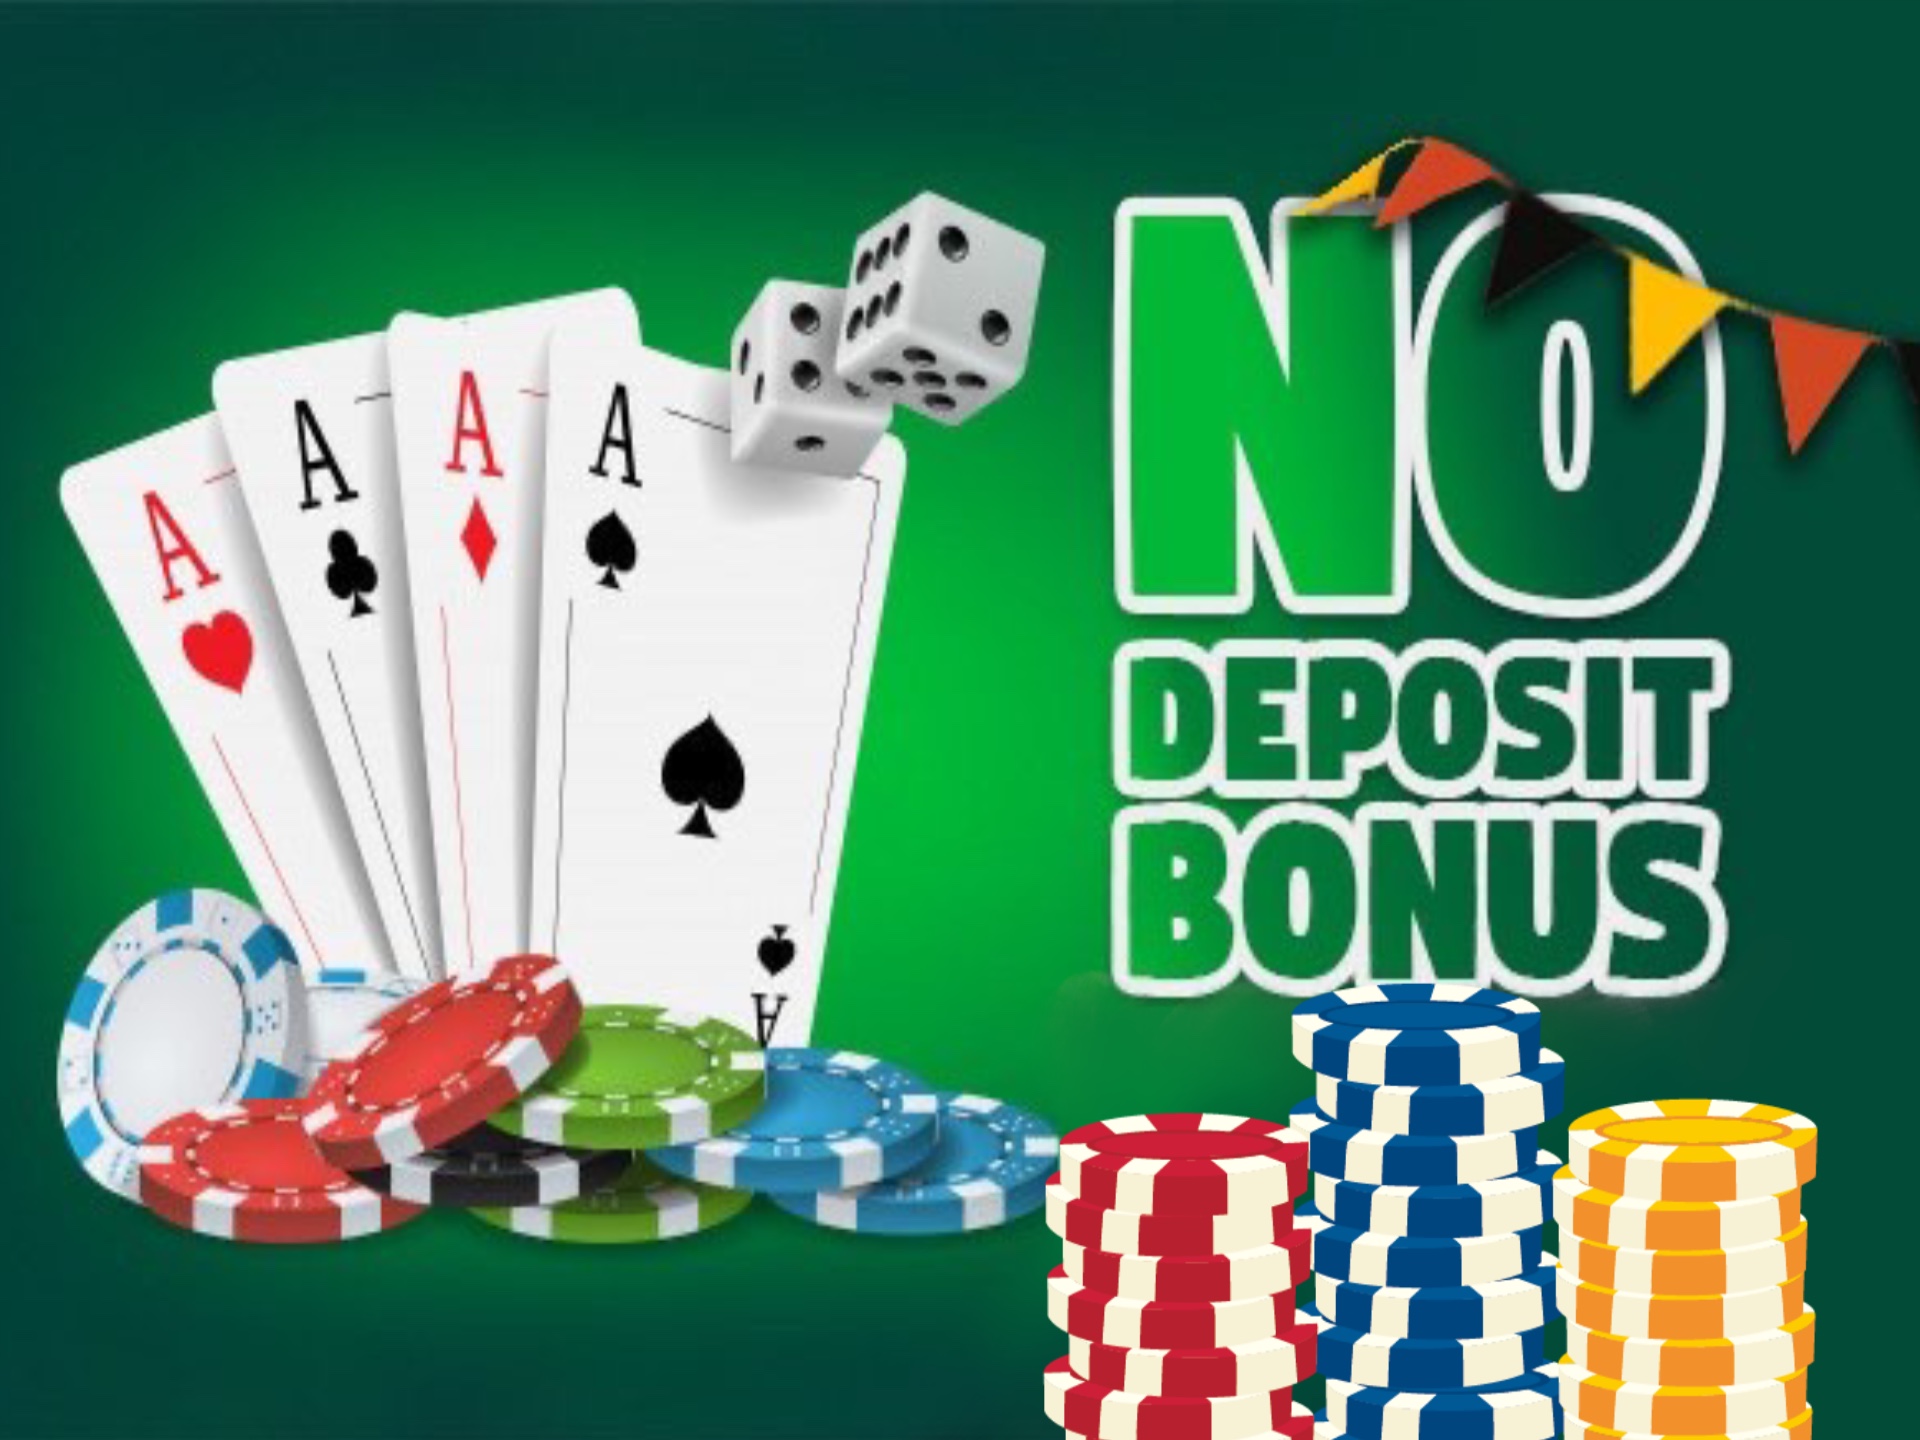 You don't have to make any deposits to get a bonus for playing casino games.